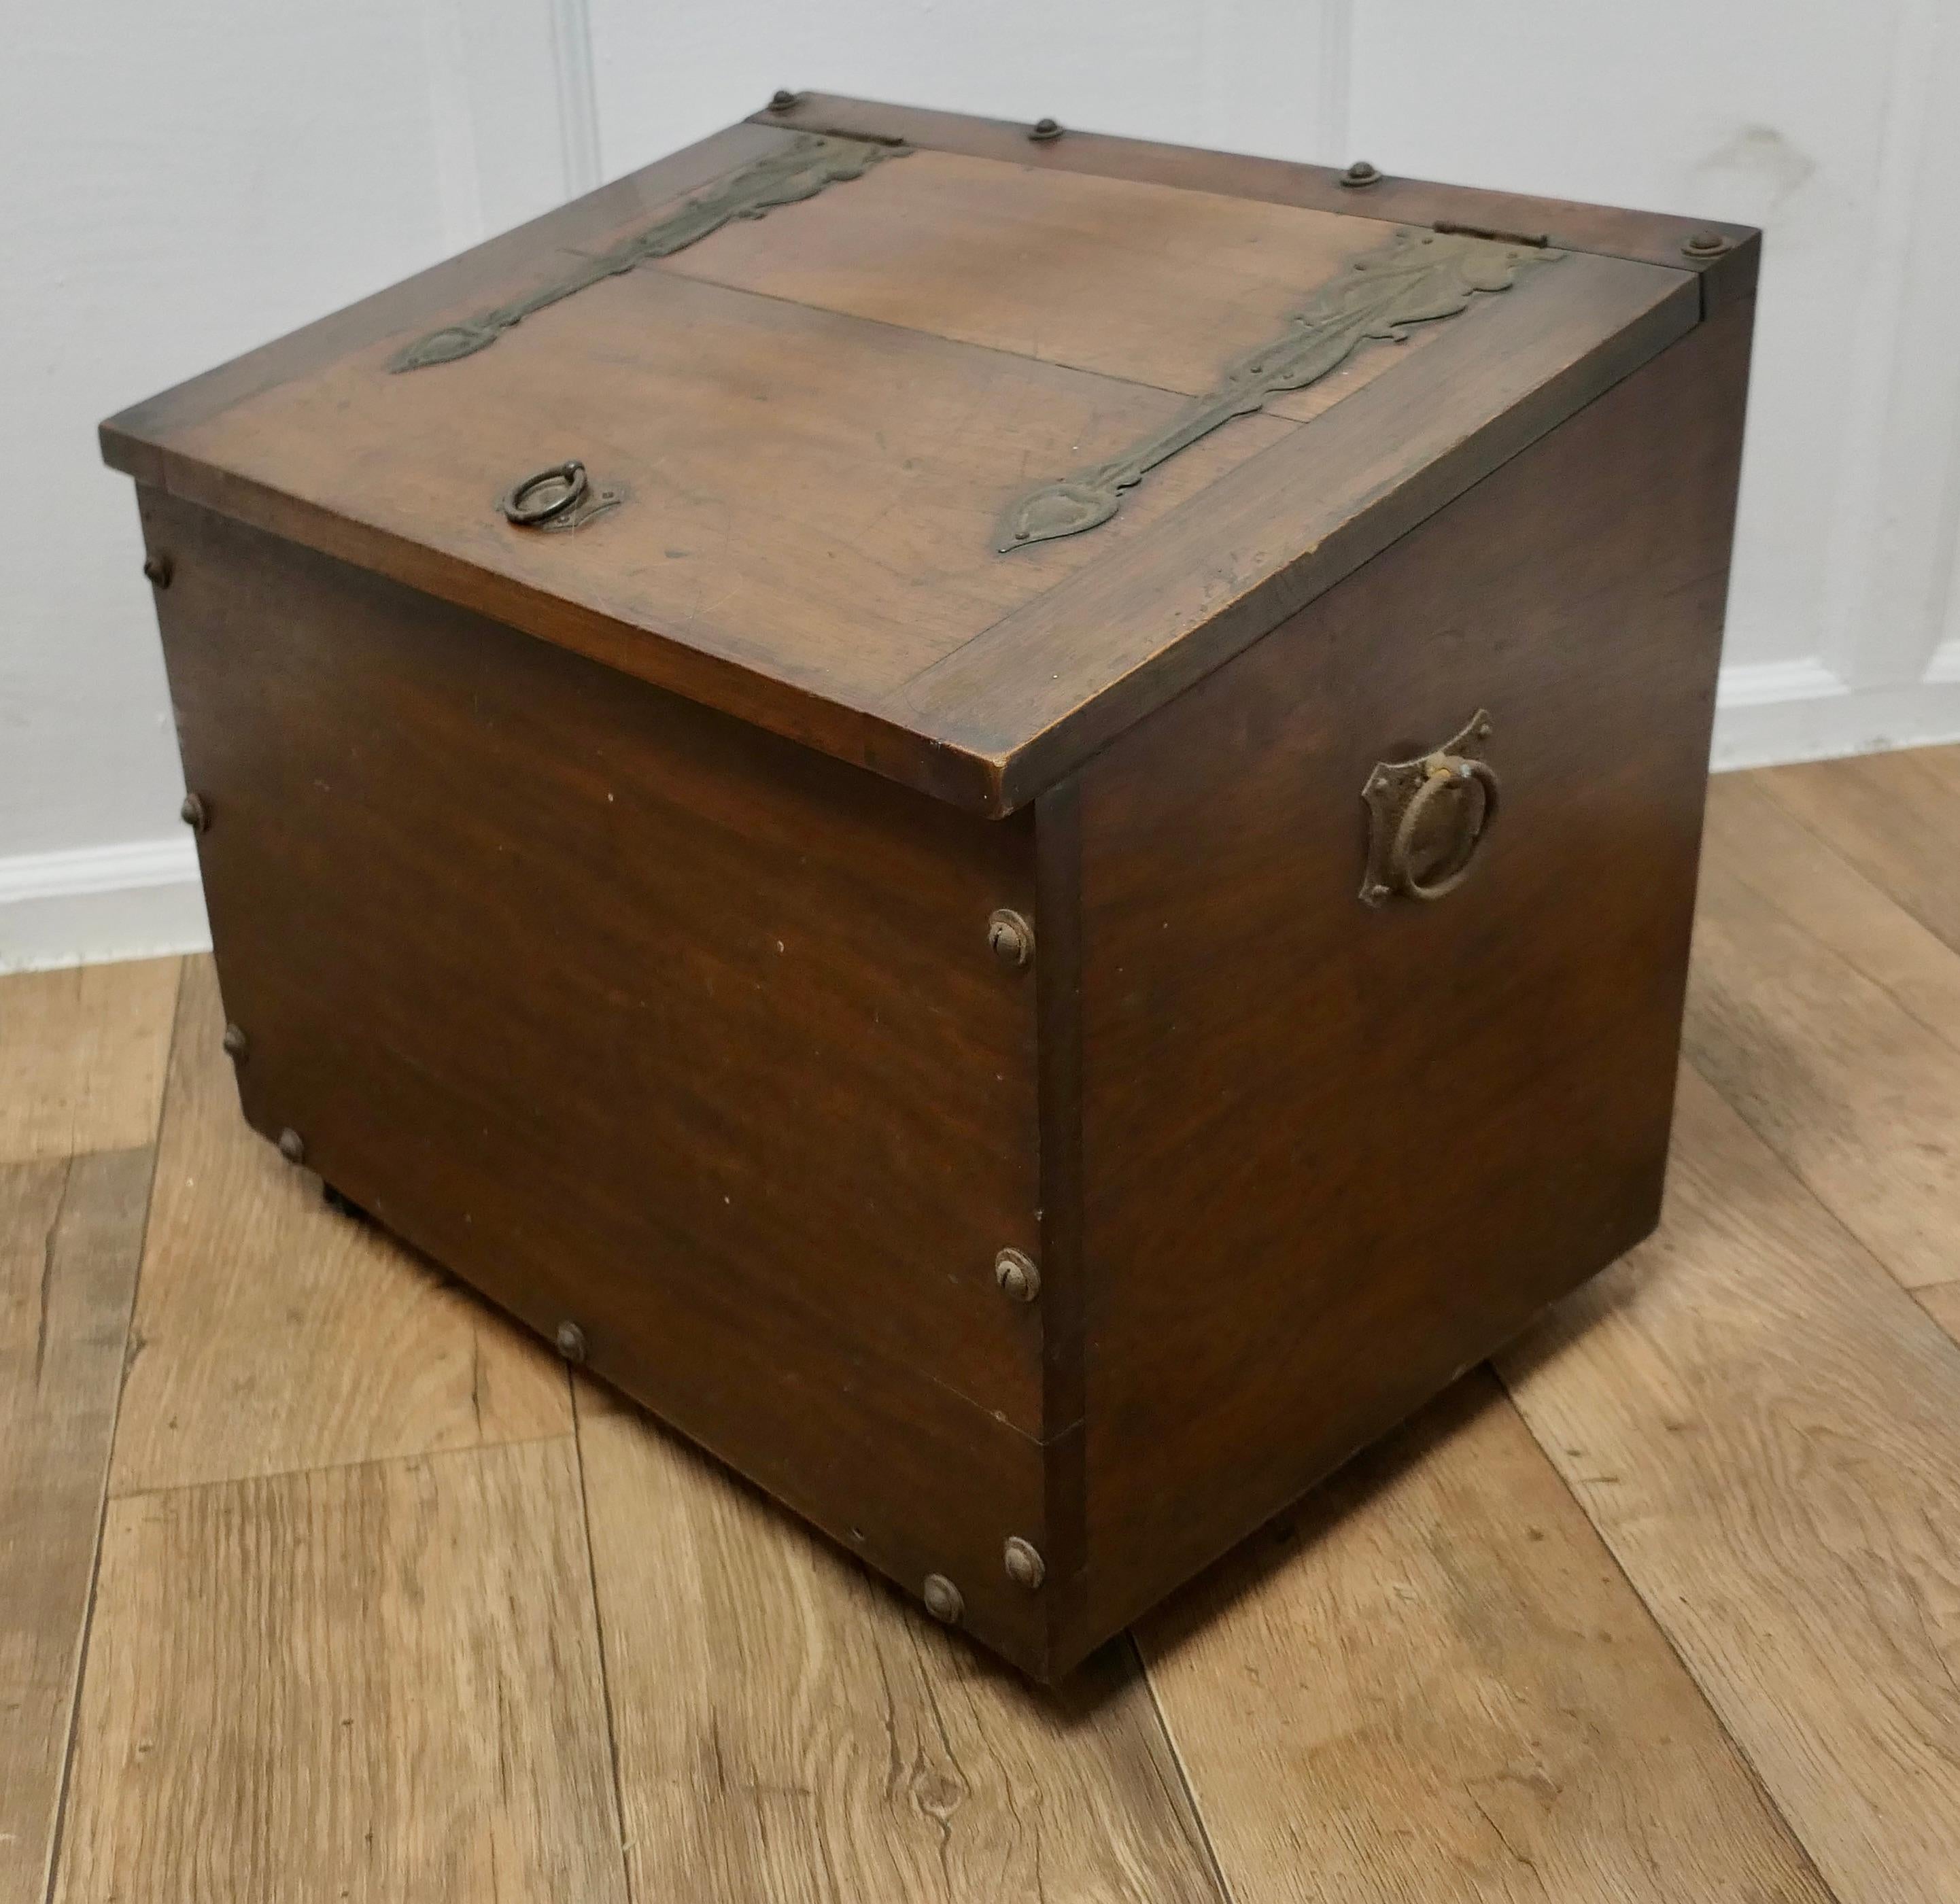 Art Nouveau  Log or Storage Box

This big log box is made in solid walnut, it has decorative Iron hinges and hand made studs, it has ring handles at the top and both sides.
This is a large box with many potential uses not least, it would make a